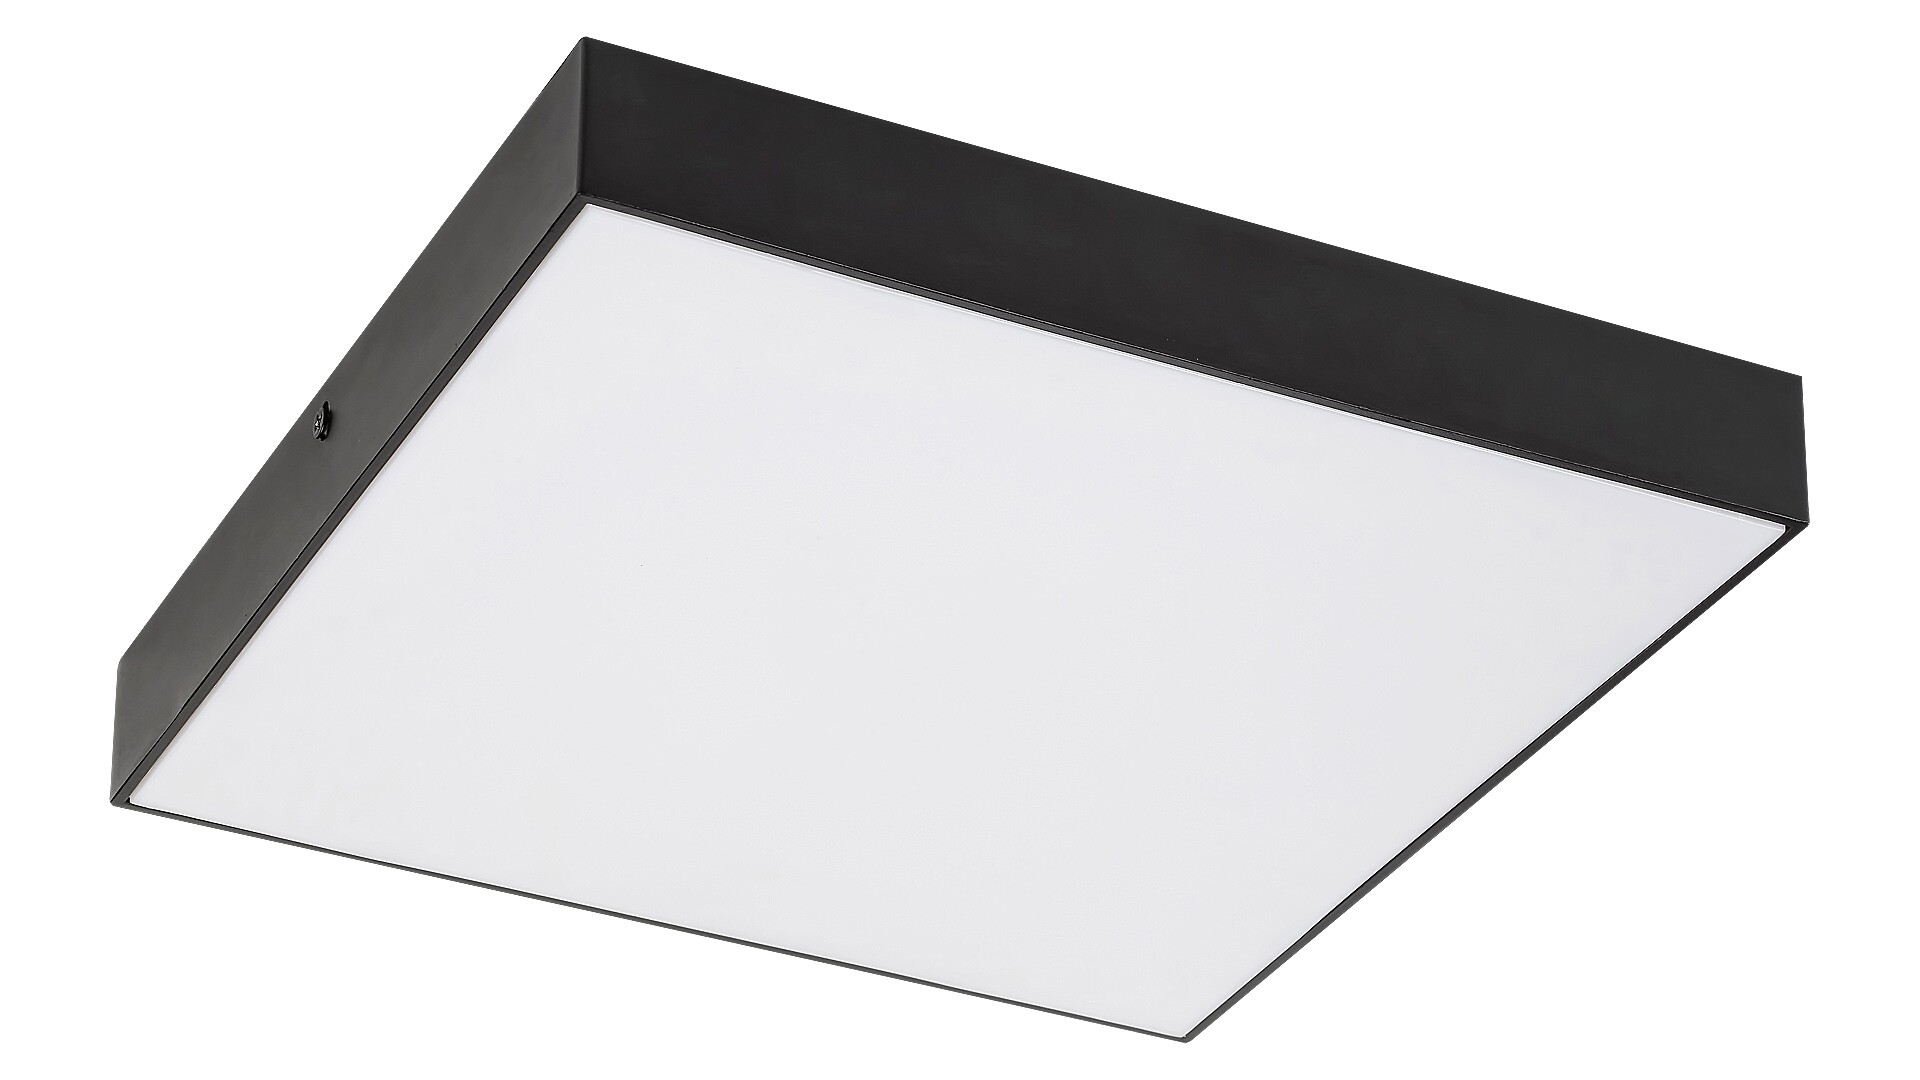 Tartu plafoniera exterior, negru mat, 18W, 1800lm, IP44, with switch in the lamp for changing color temperature